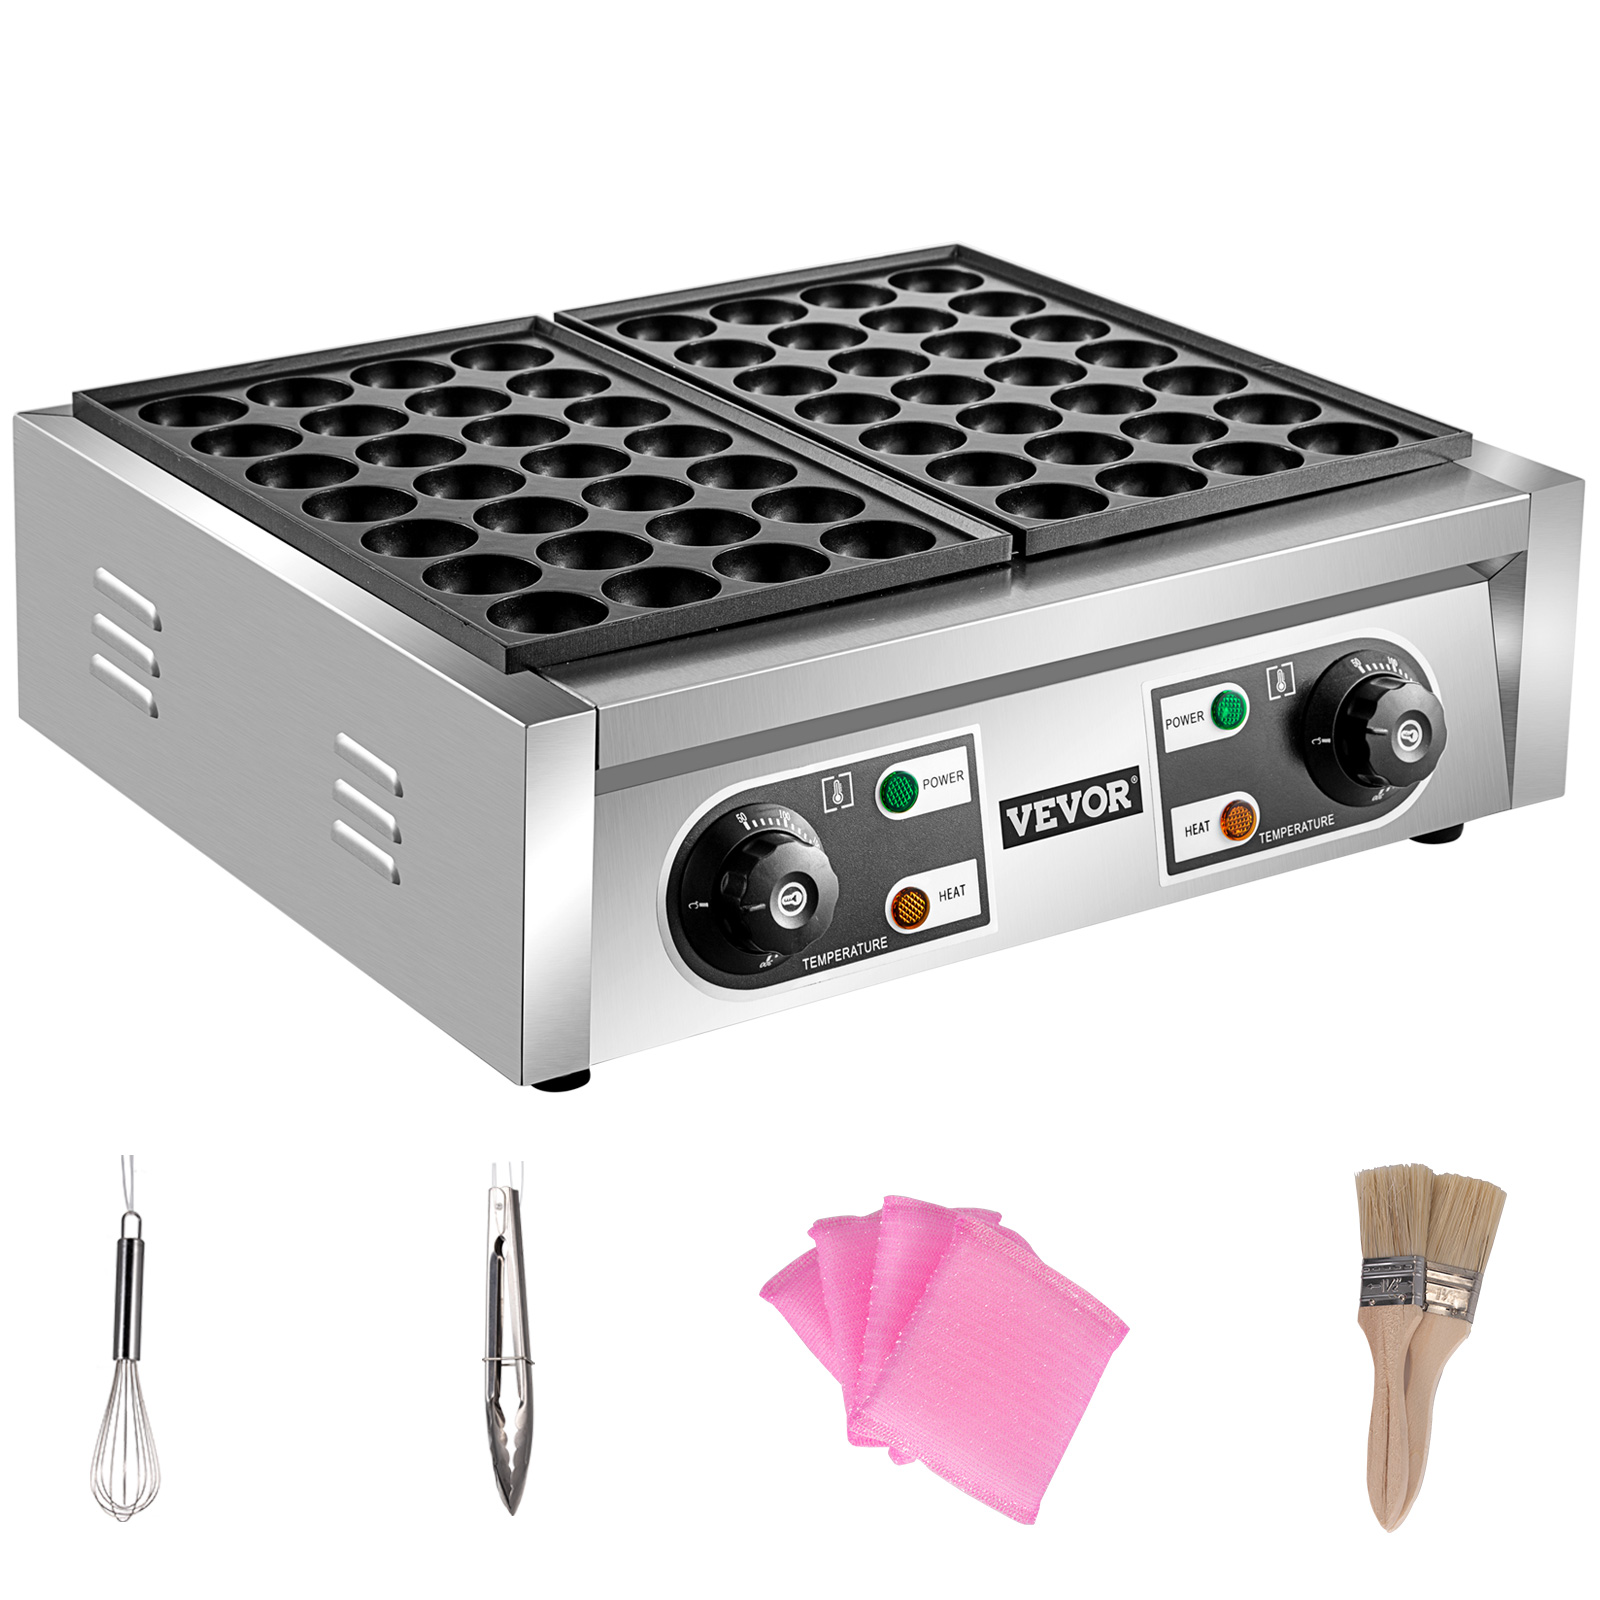 commercial waffle cone maker, stainless steel, non-stick coating